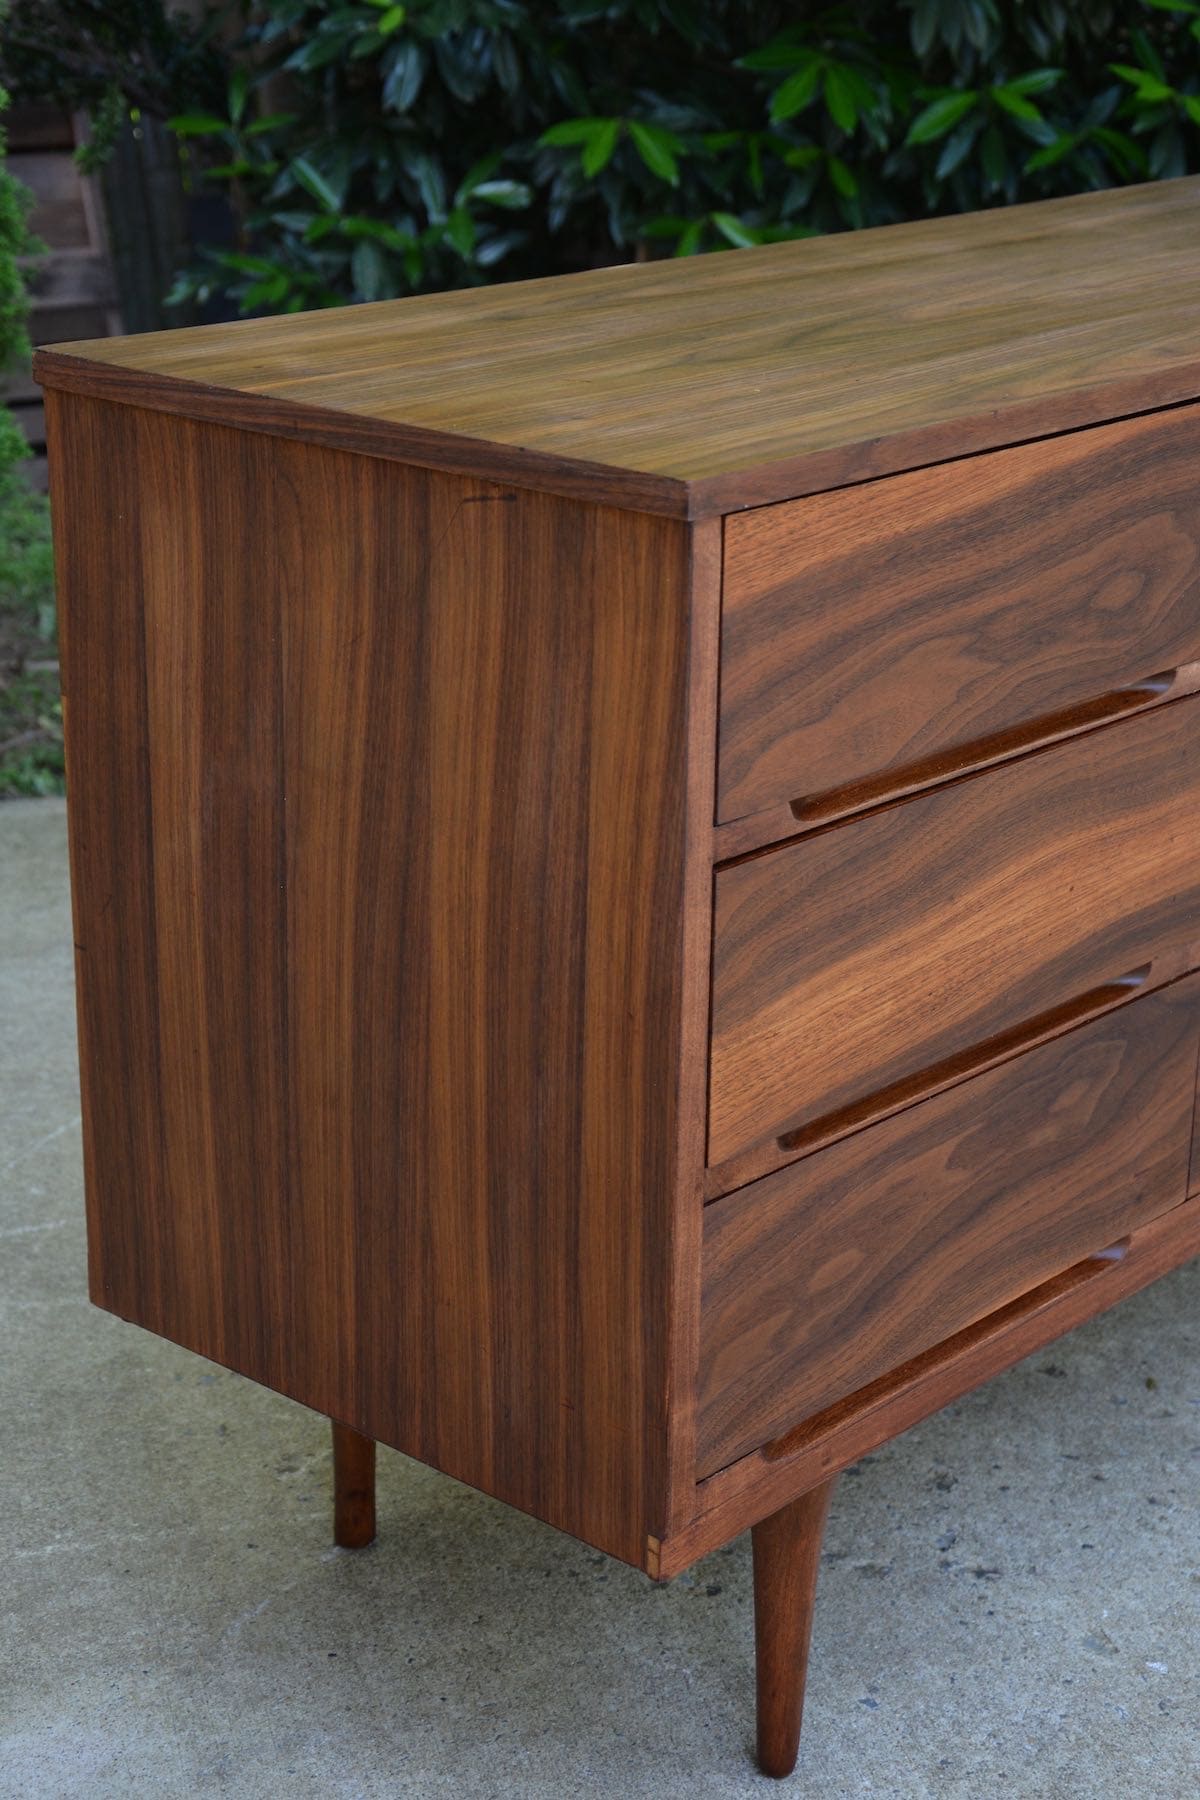 When Should You NOT Paint Wood Furniture - Mid century modern dresser gets stripped with gorgeous grain. - Thrift Diving